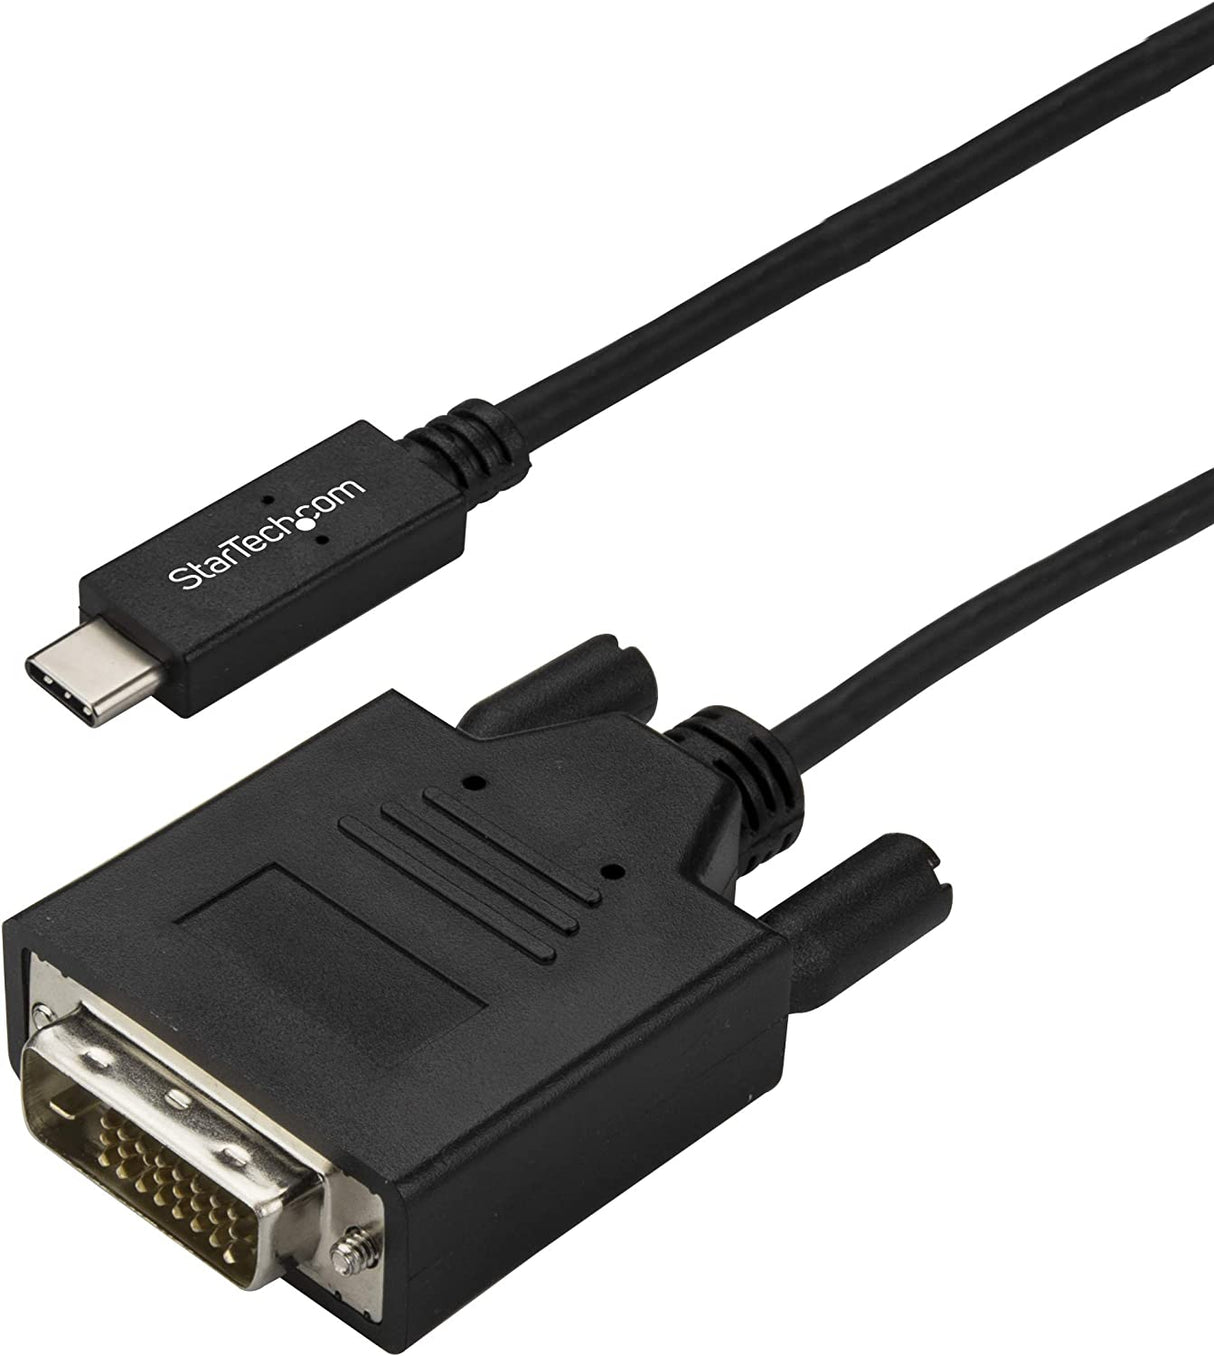 StarTech.com 10ft (3m) USB C to DVI Cable - 1080p (Single Link) USB Type-C (DP Alt Mode HBR2) to DVI-Digital Video Adapter Cable - Works w/ Thunderbolt 3 - Laptop to DVI Monitor/Display (CDP2DVI3MBNL) 9.8 feet